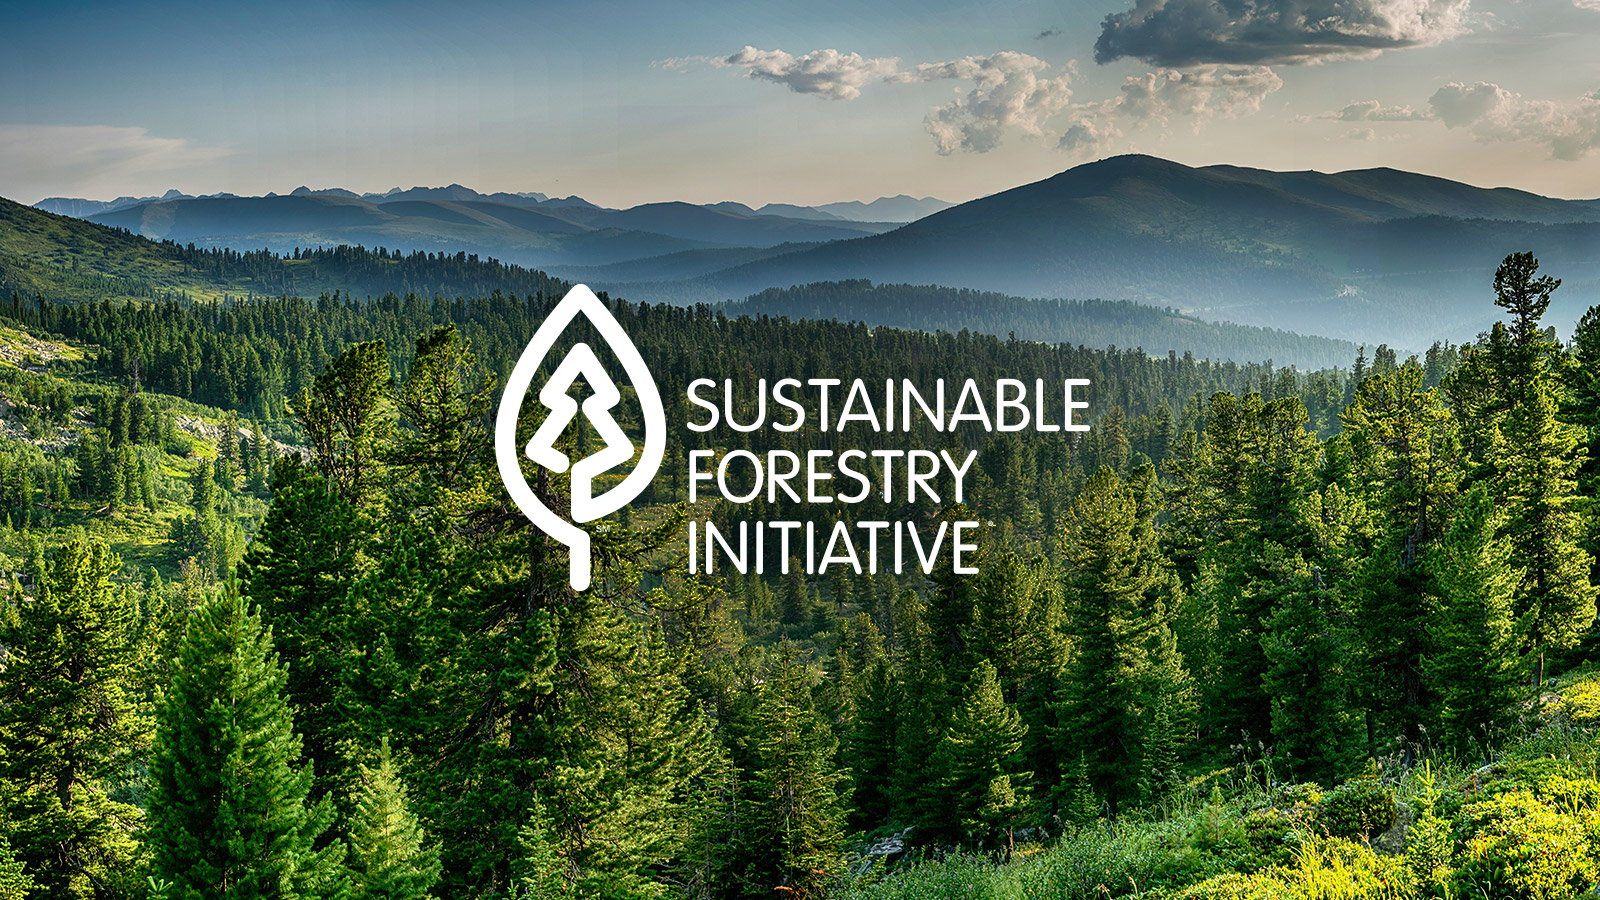 Sustainable Forestry Initiative logo on top of sunny forest landscape